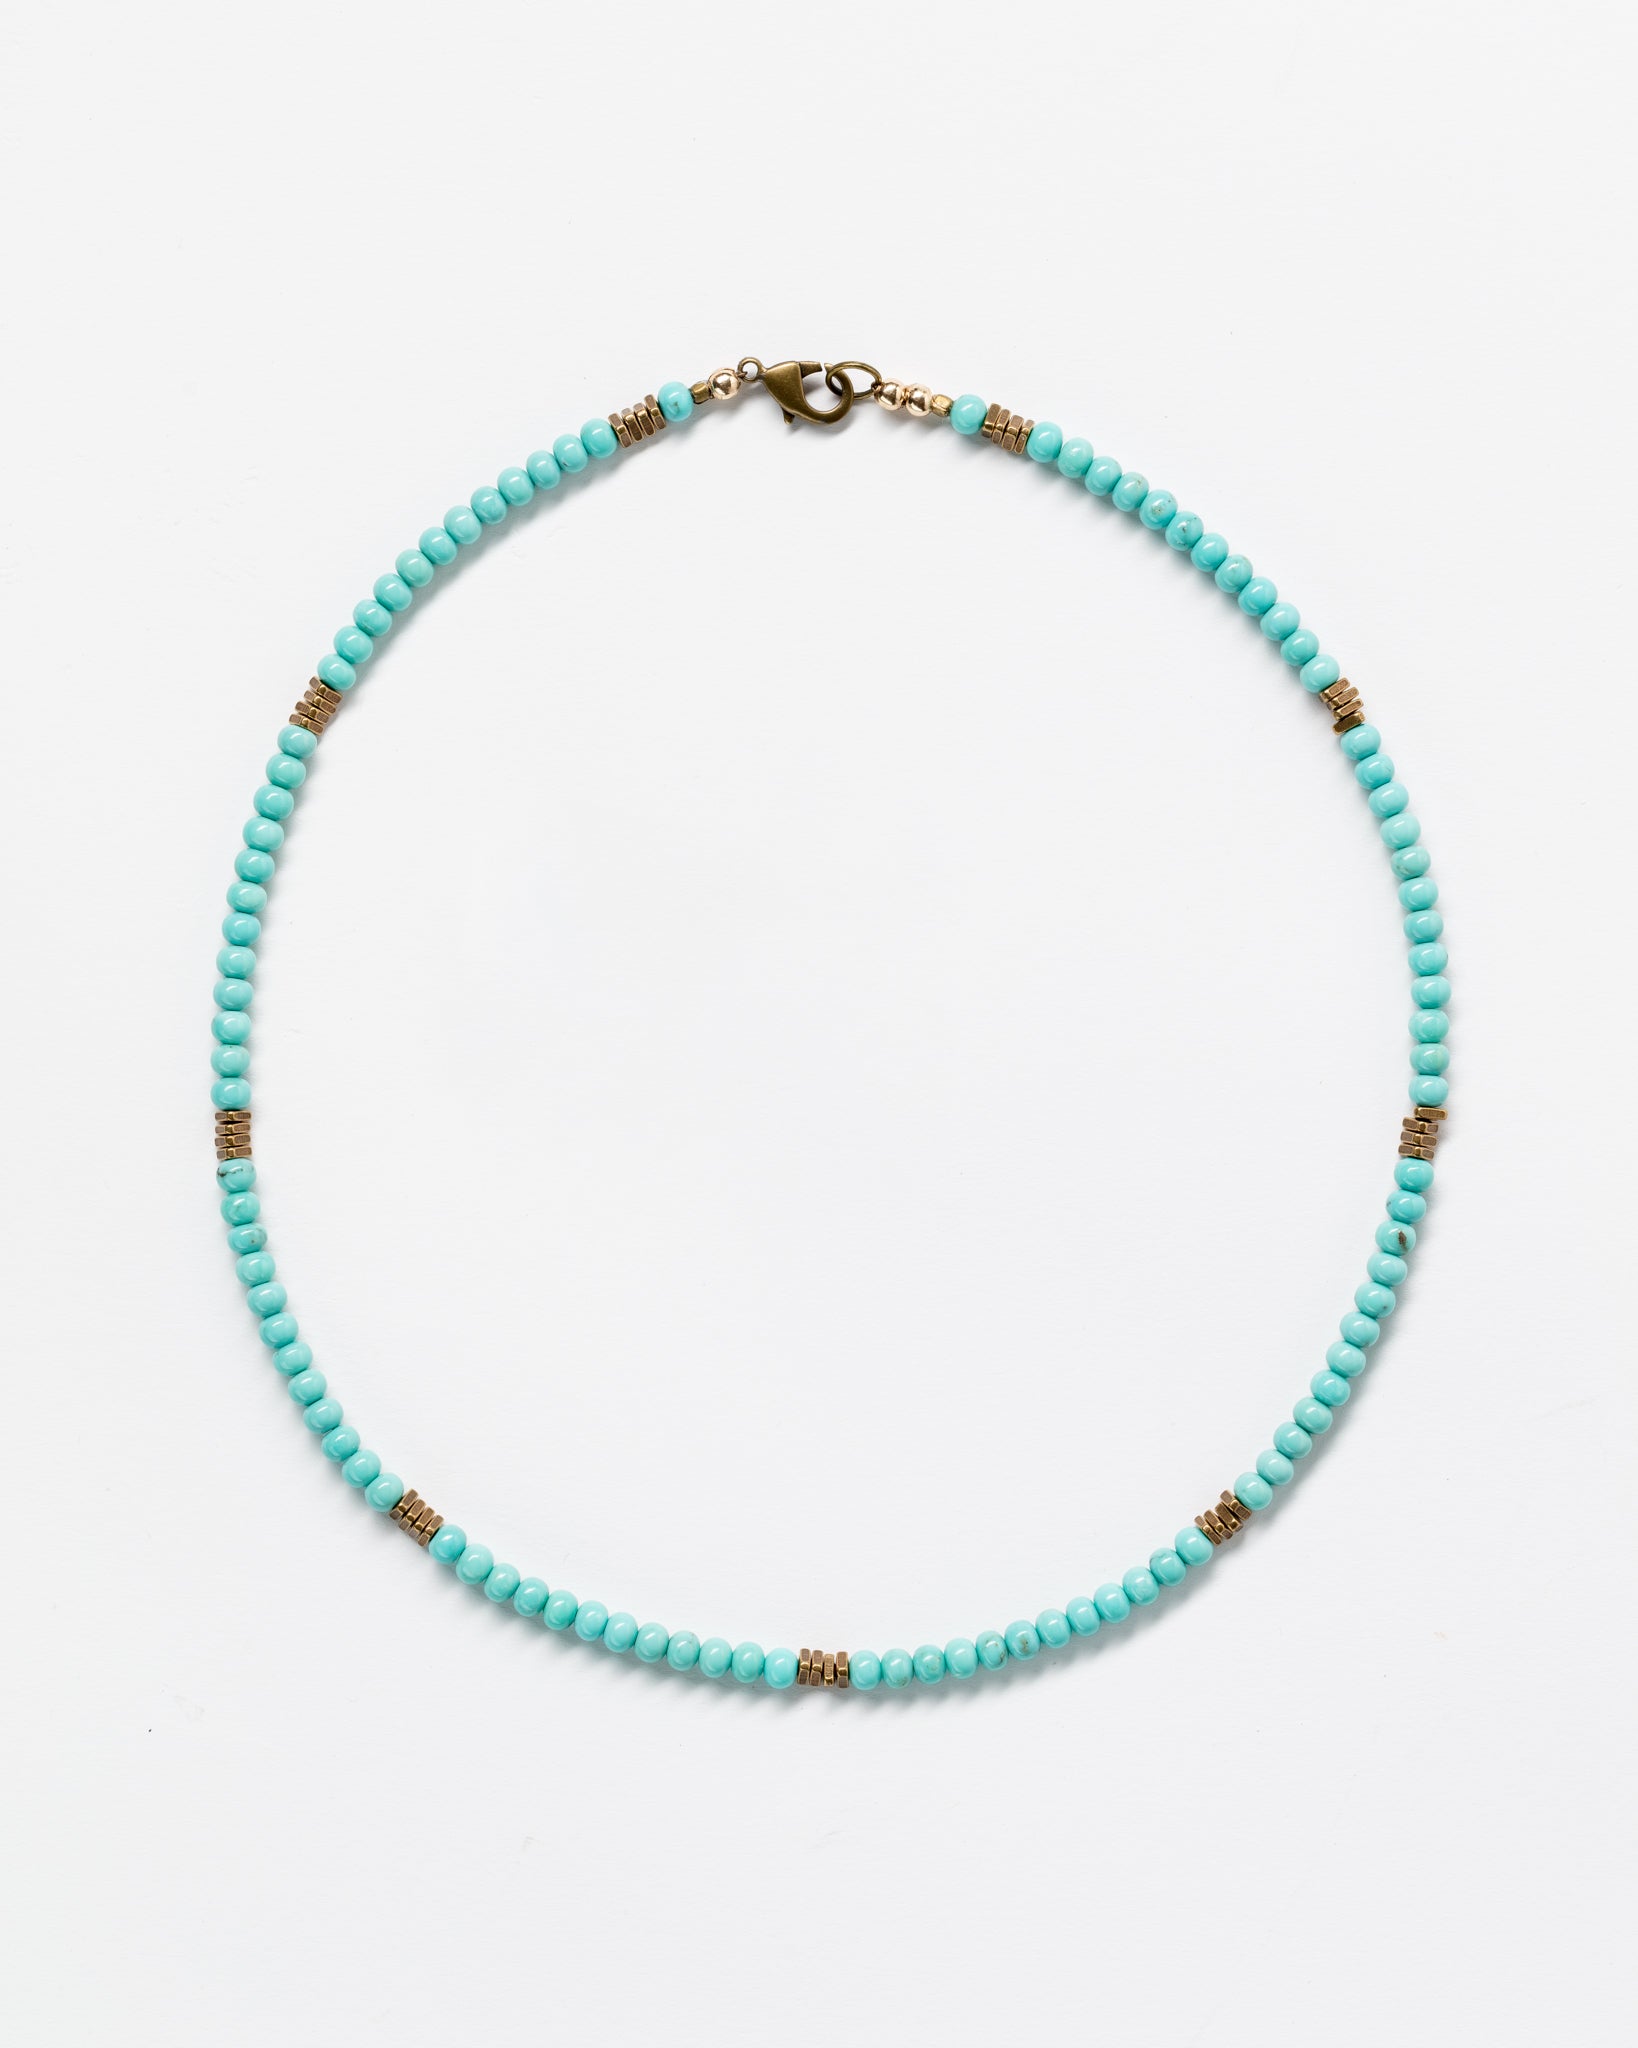 A Designs By Raya turquoise beaded necklace with intricate gold accents arranged intermittently, displayed against a plain white background, embodying Arizona style.